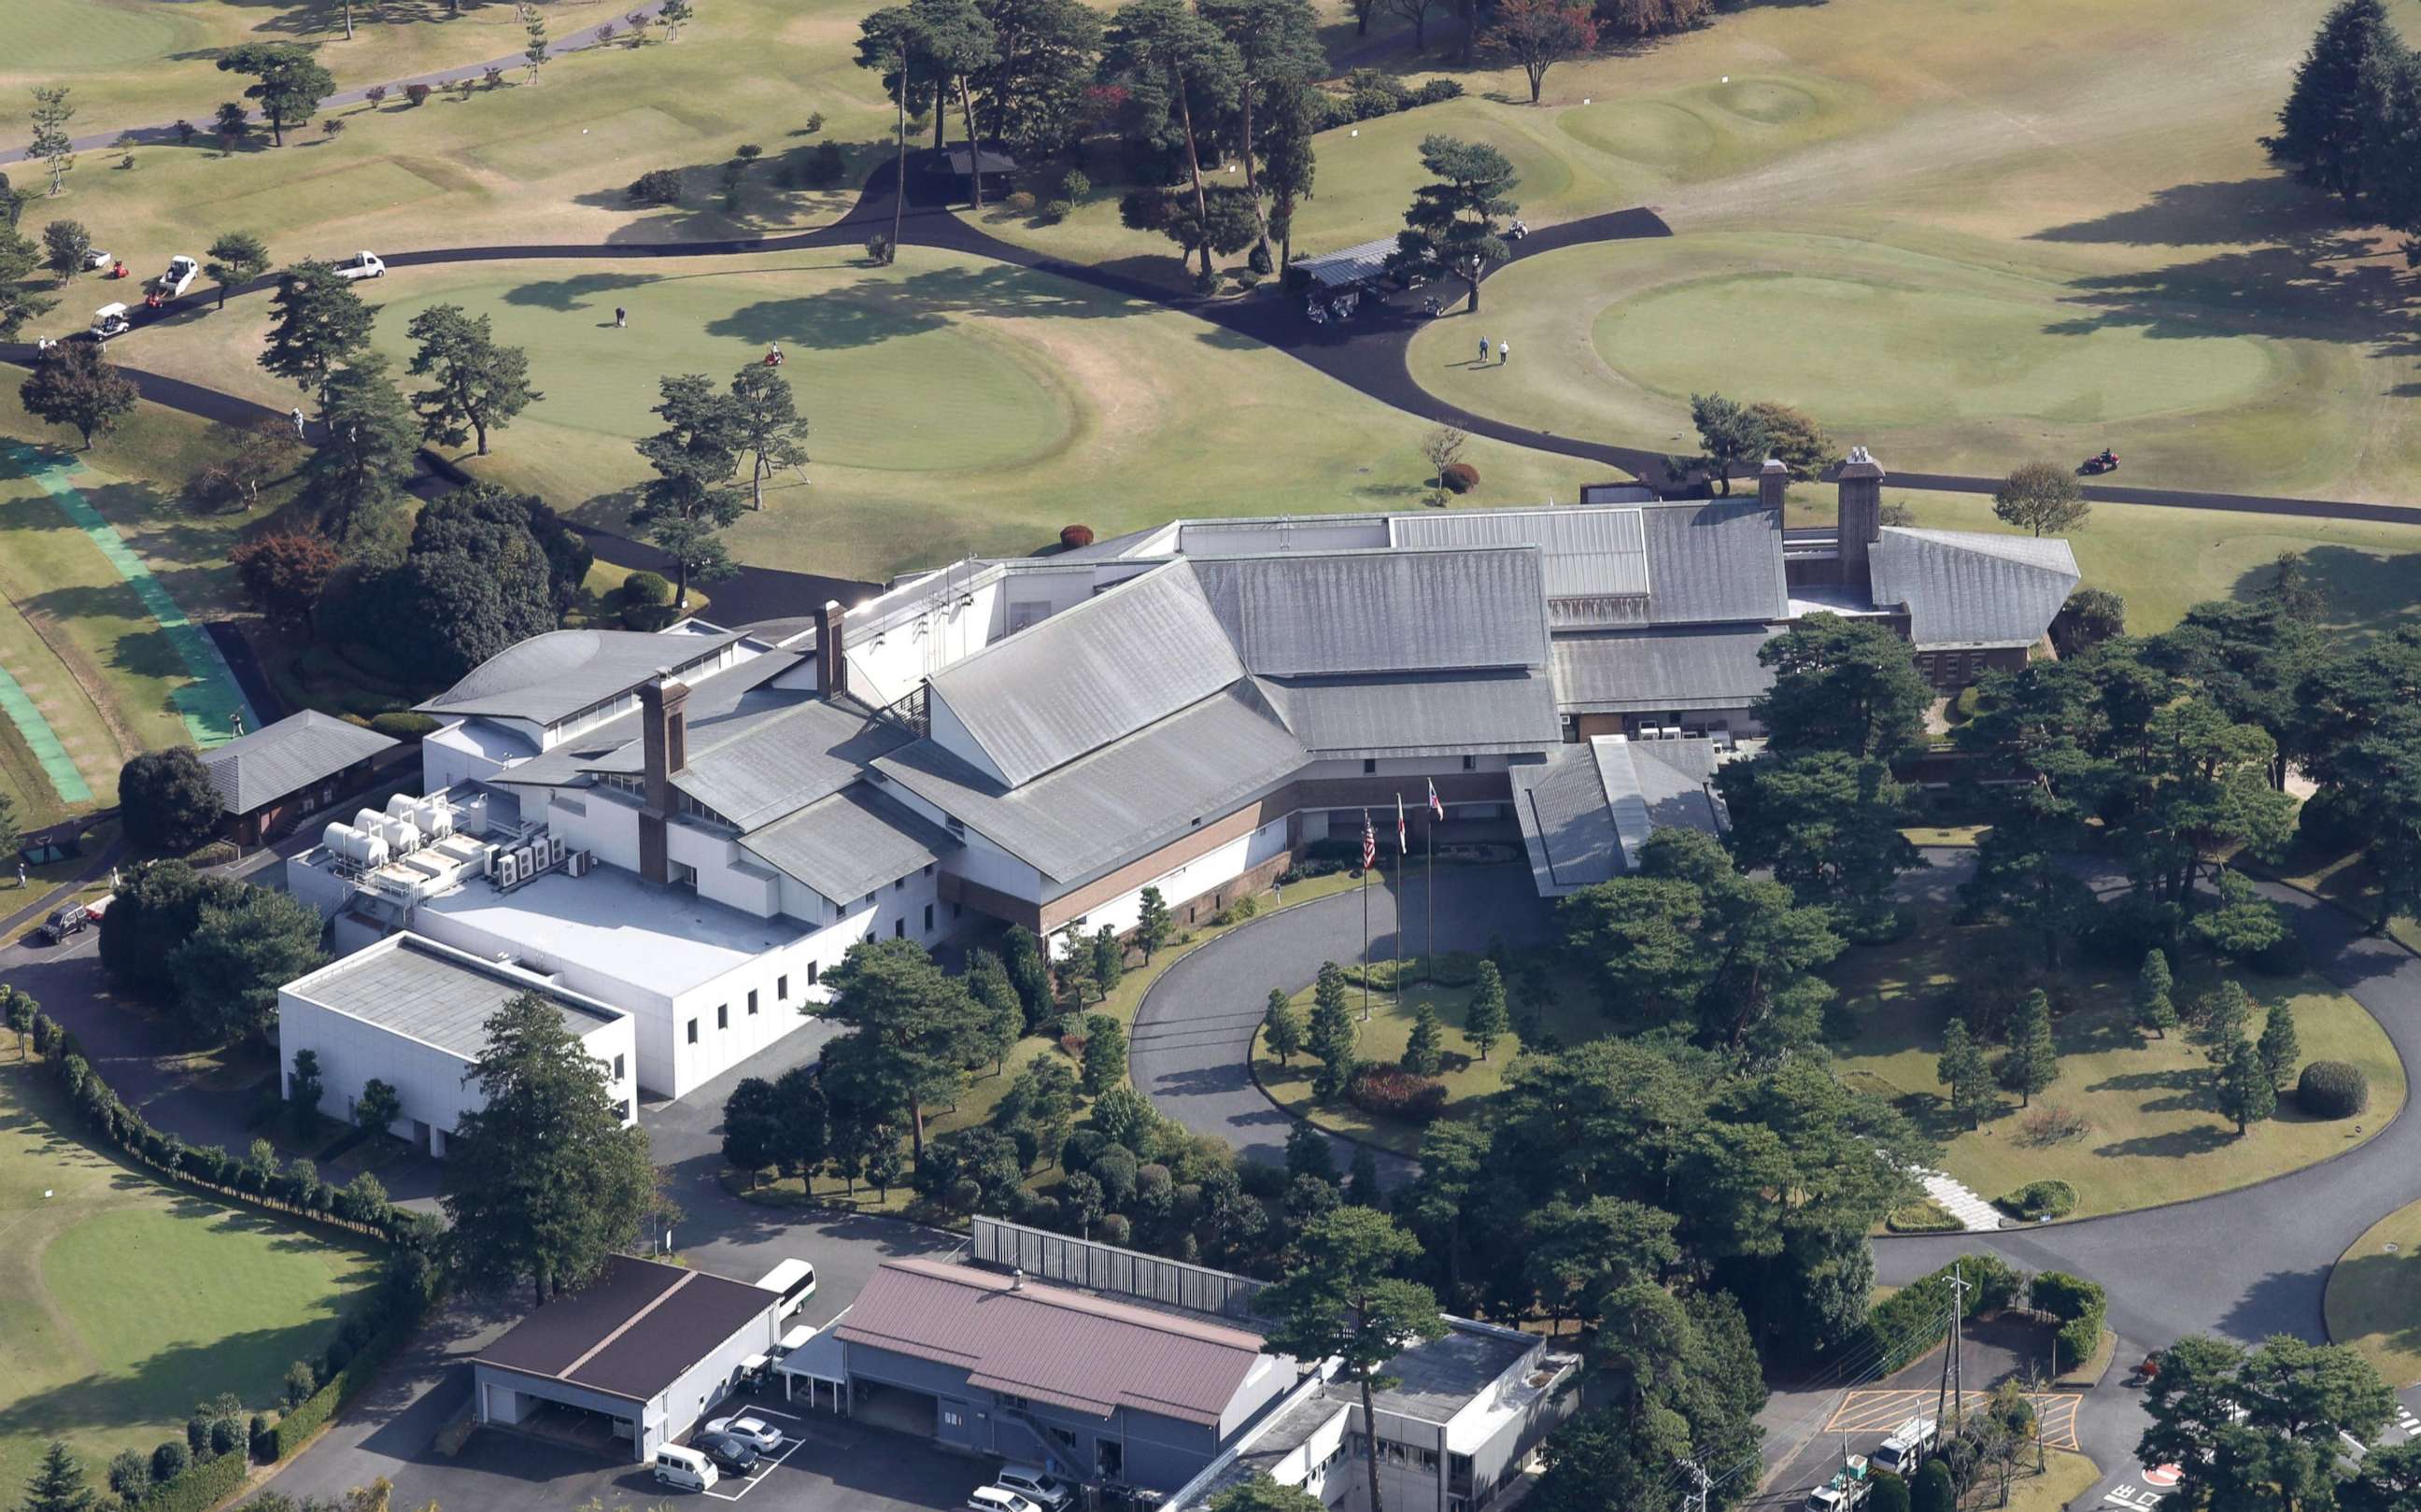 PHOTO: Photo taken Nov. 2, 2017, from a Kyodo News helicopter shows the clubhouse of Kasumigaseki Country Club in Kawagoe, Saitama Prefecture, where Donald Trump is scheduled to play golf with Shinzo Abe and PGA Tour player Hideki Matsuyama on Nov. 5.